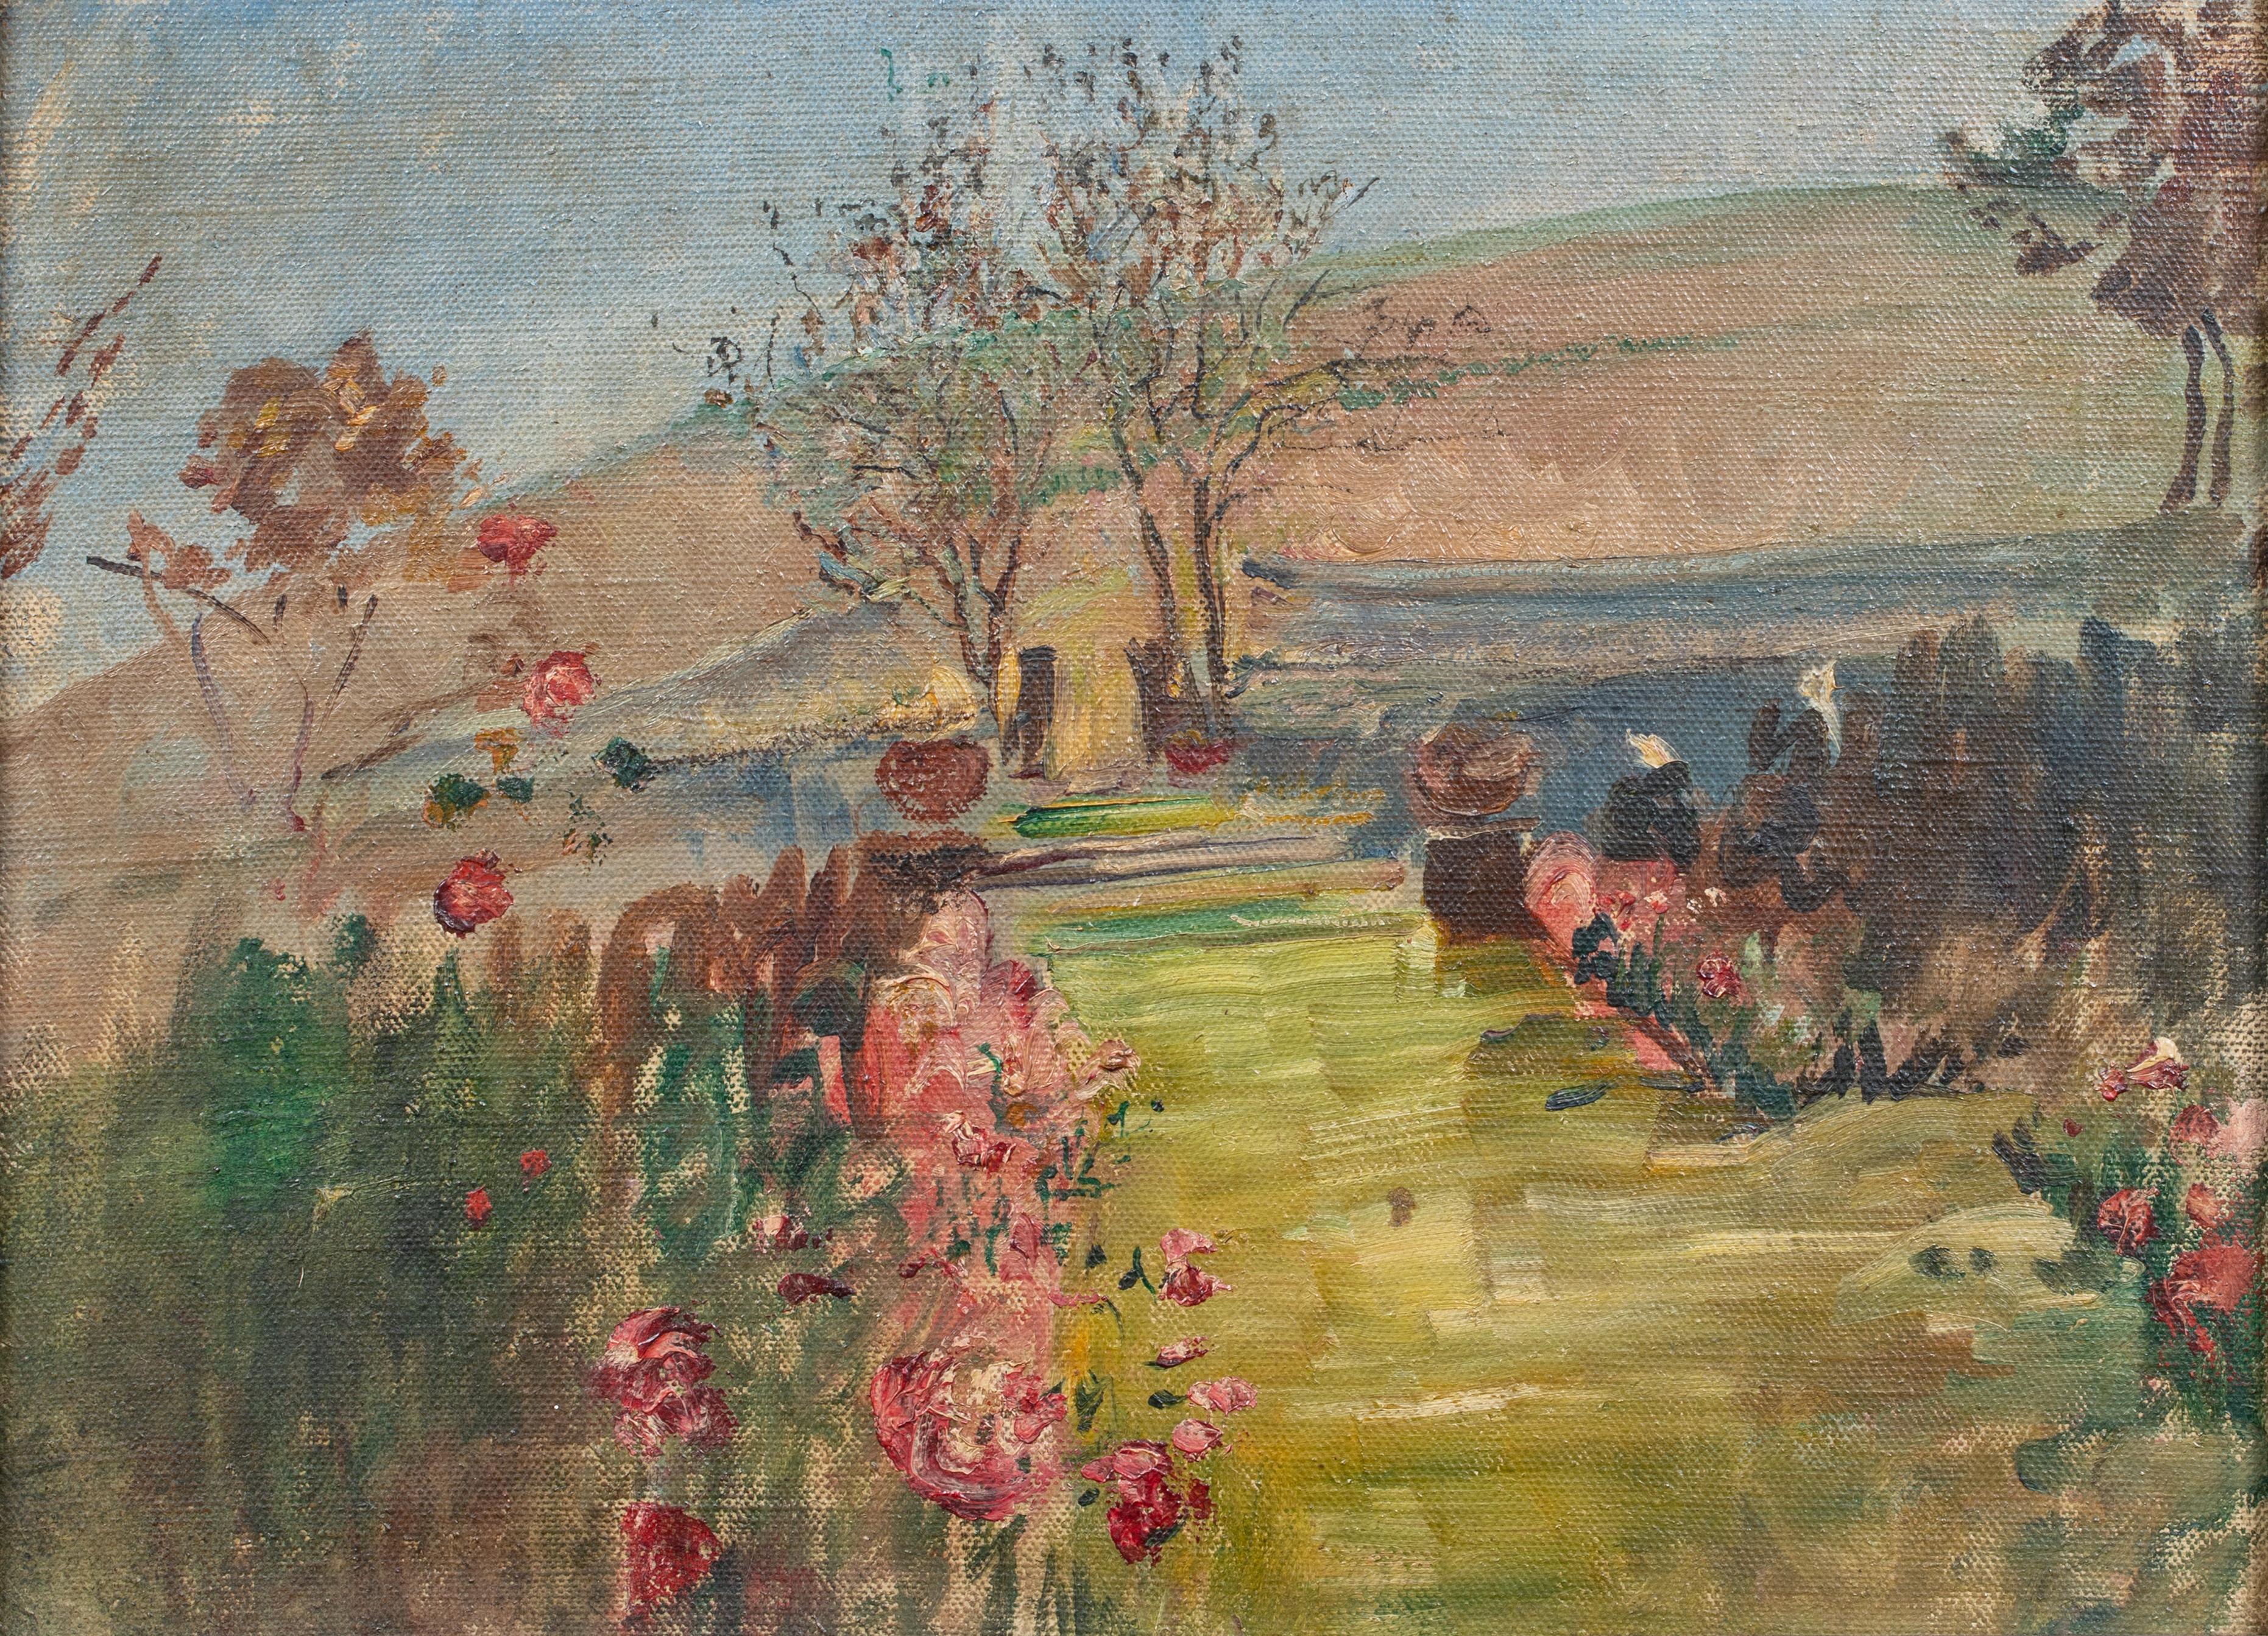 Unknown Landscape Painting - Early Spring Landscape, early 20th century  by ANNIE SWYNNERTON (1844-1933)